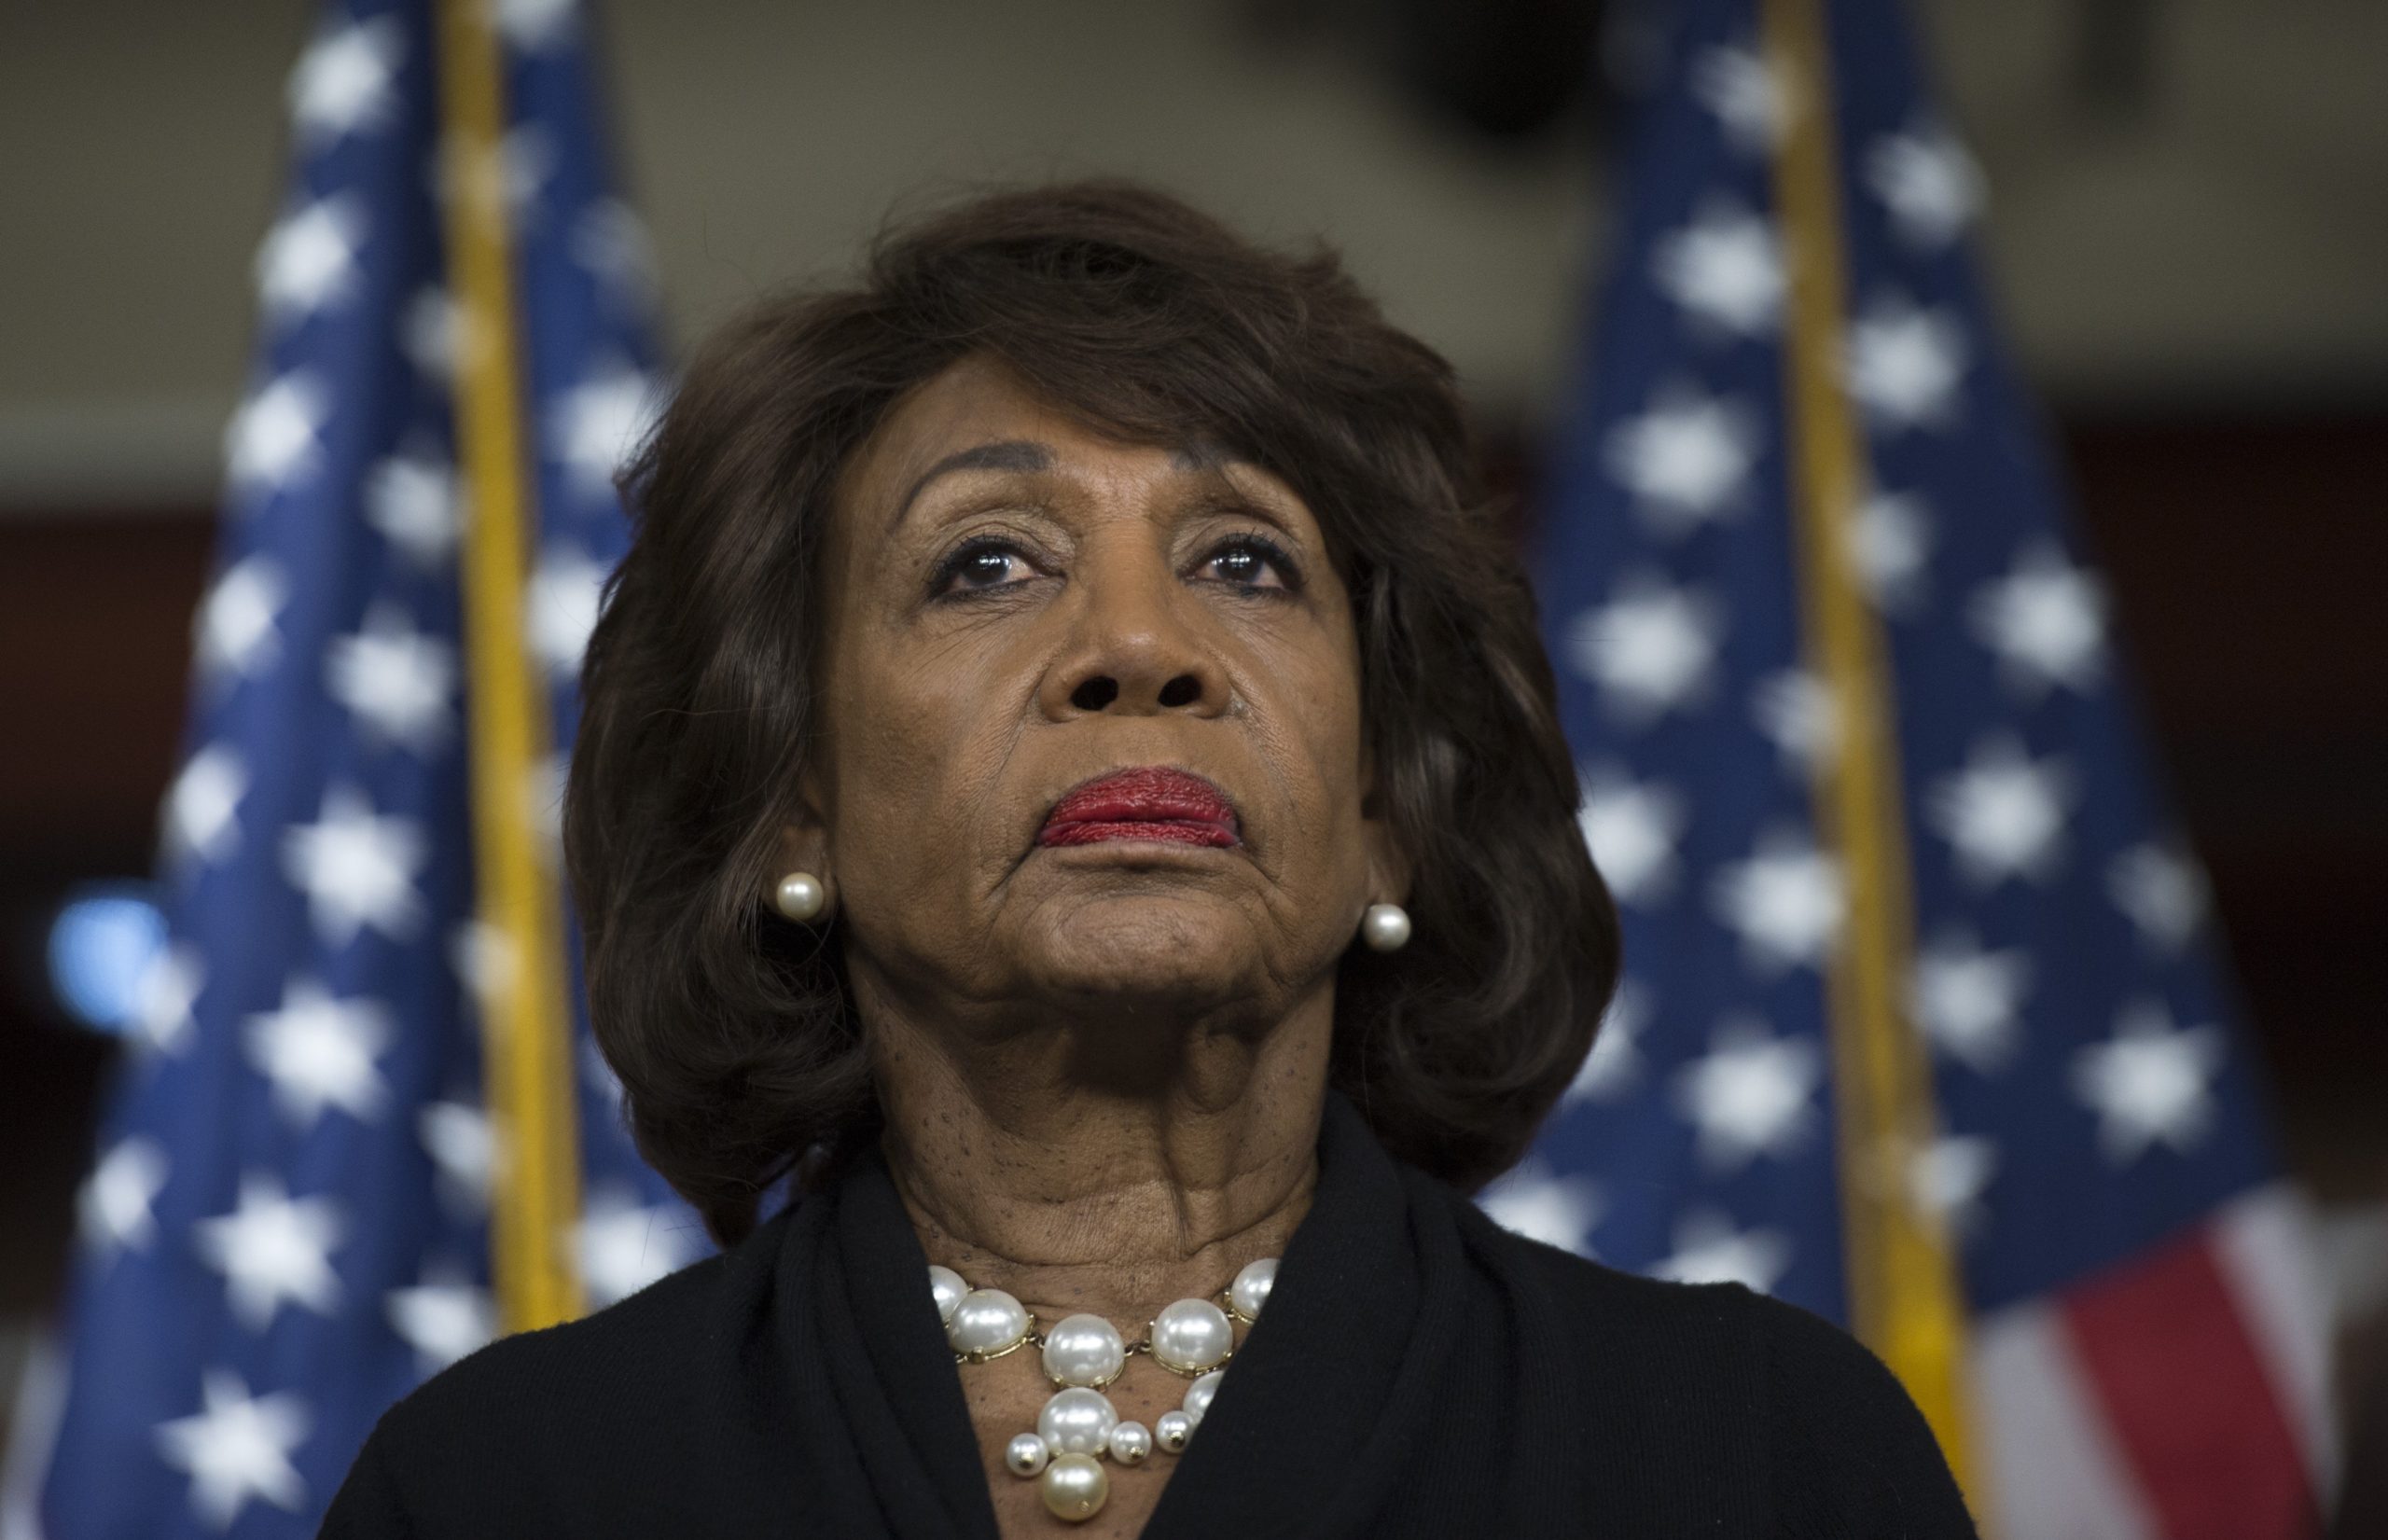 Maxine Waters Says She Spent Thanksgiving Away From Her Husband While "Plotting On The Republicans" In Order To Help Pass A Second Stimulus Plan